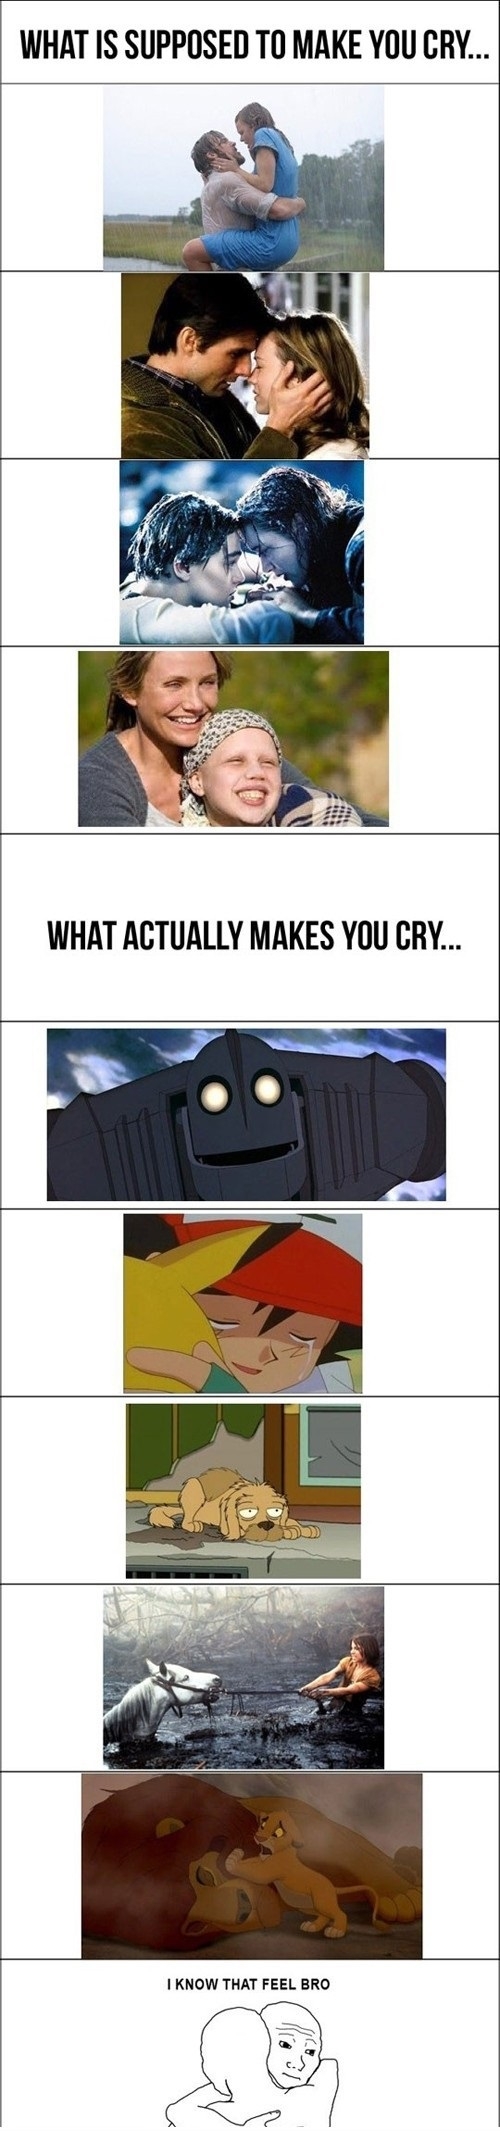 What makes us cry